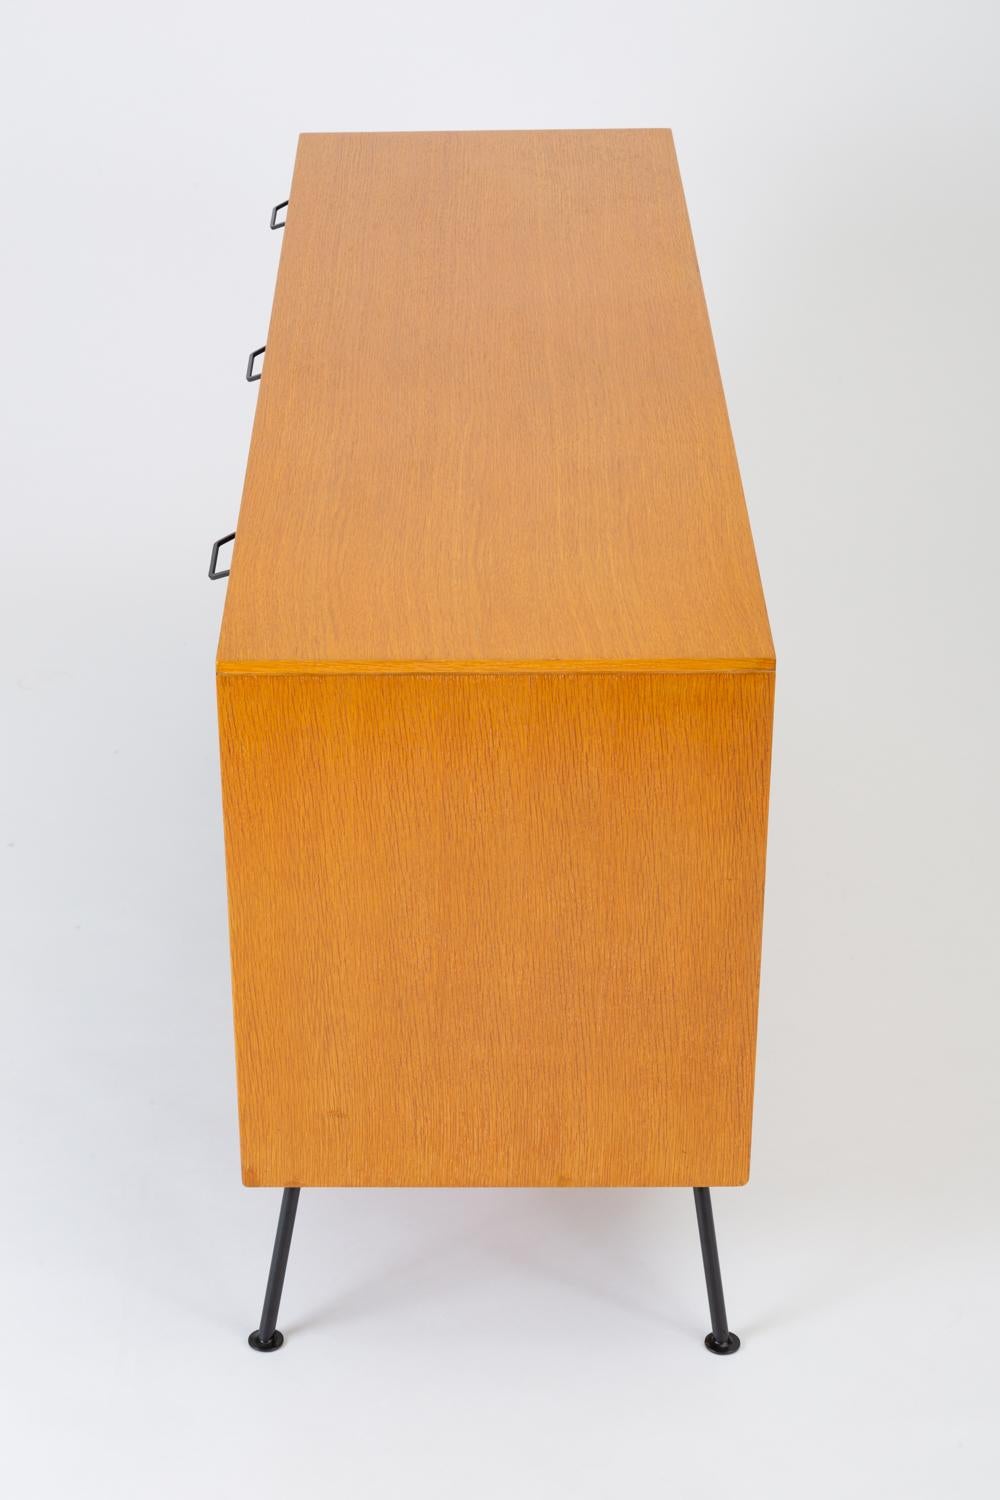 Powder-Coated Nine-Drawer Dresser from Raymond Loewy’s “Accent” Line for the Mengel Company